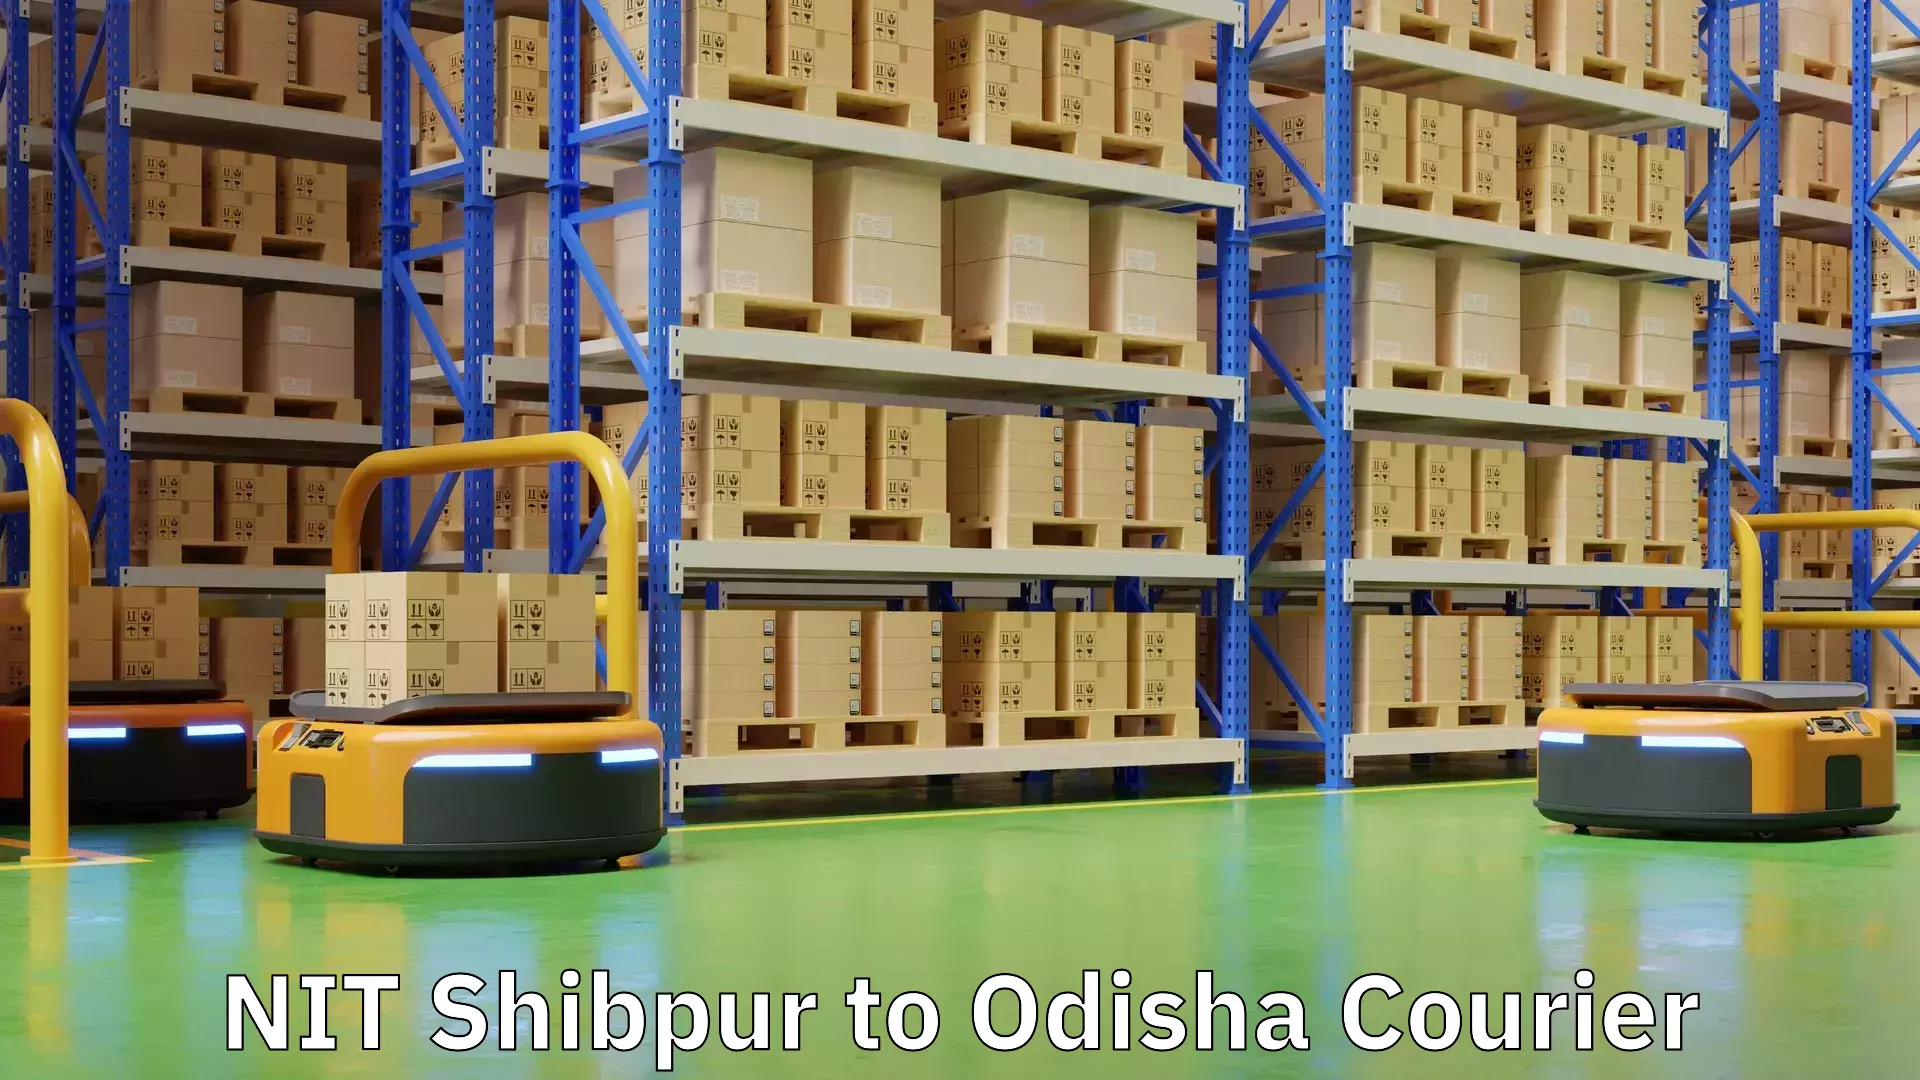 Business courier solutions NIT Shibpur to Odisha